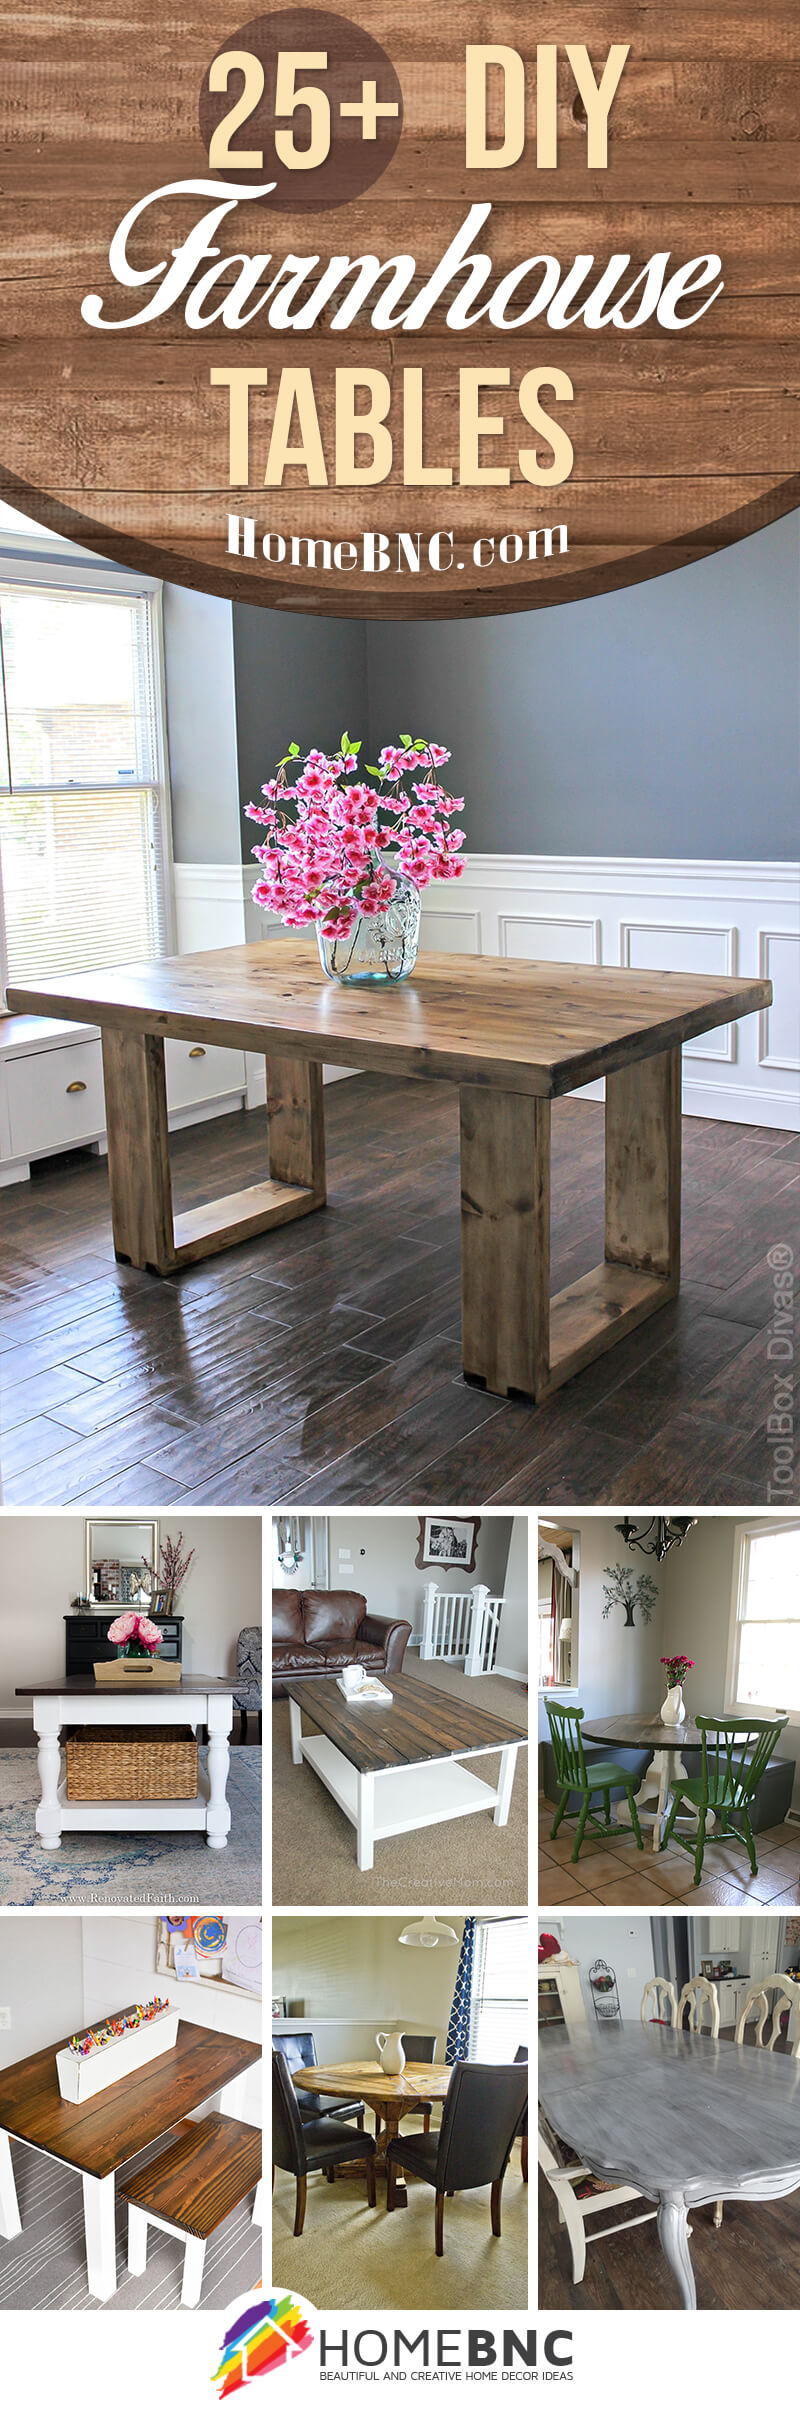 18+ Best Rustic DIY Farmhouse Table Ideas and Designs for 18